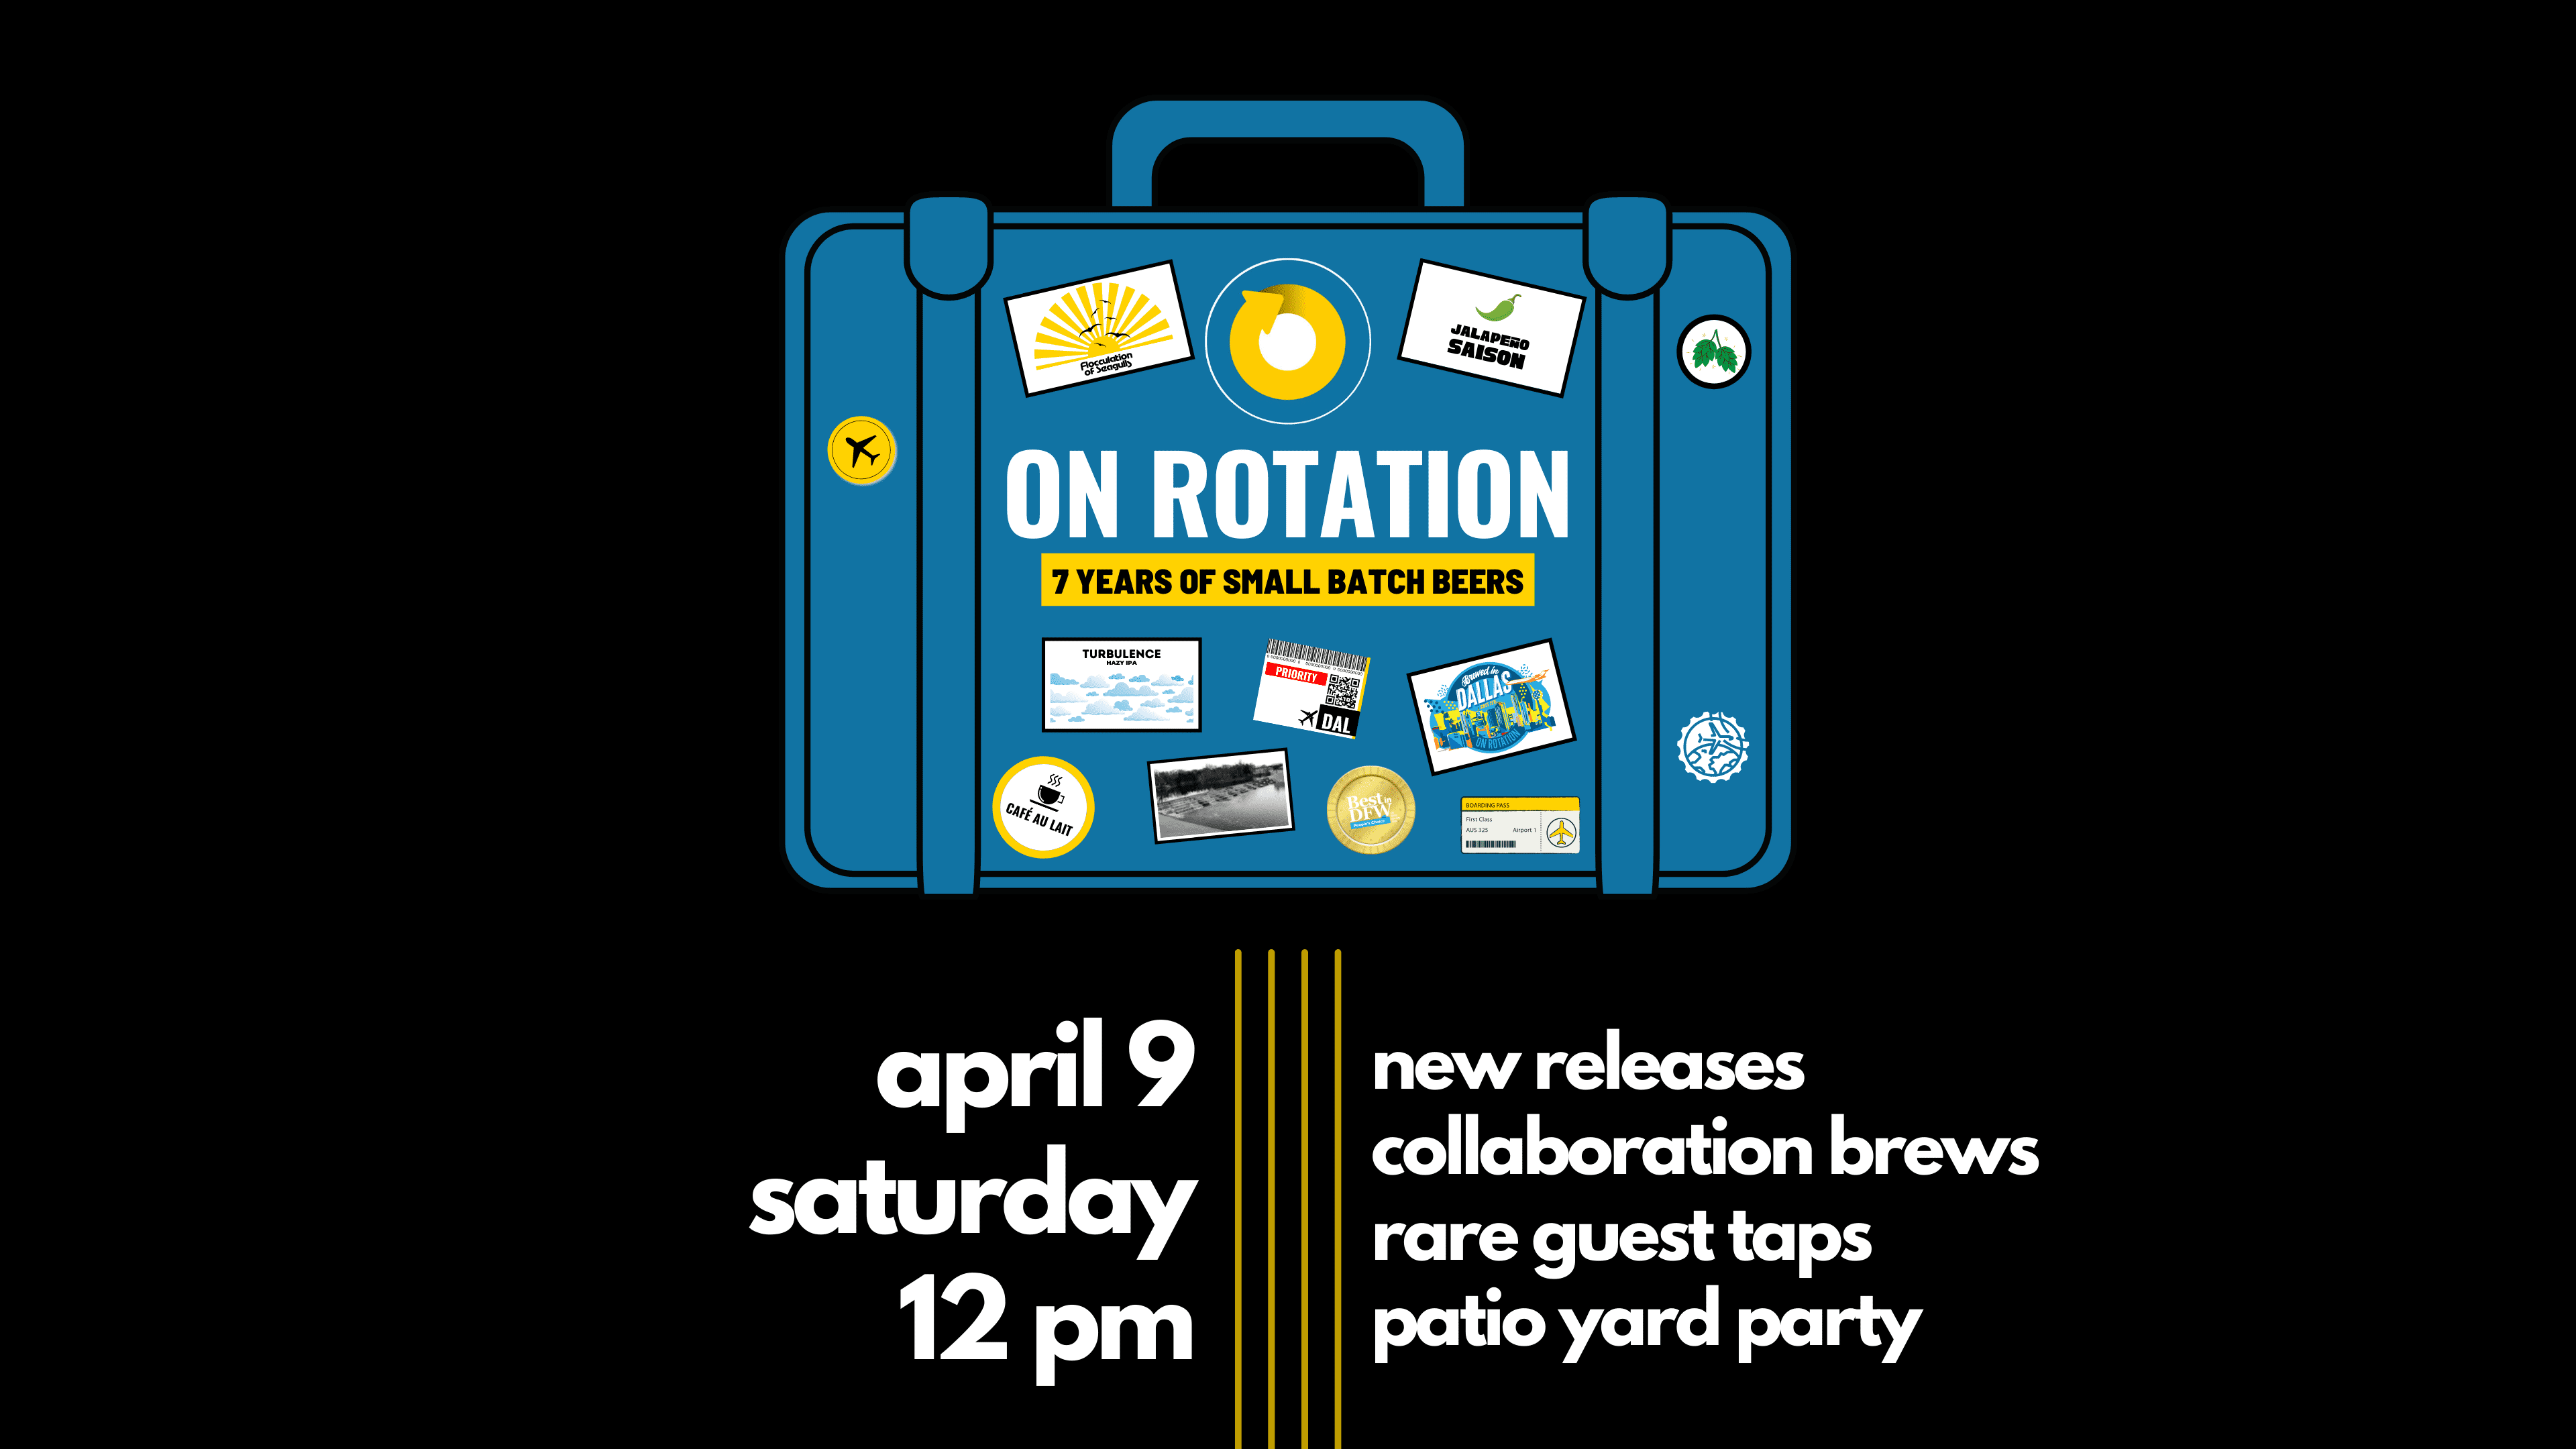 On Rotation celebrates 7 years of small batch beers with lawn games & new releases